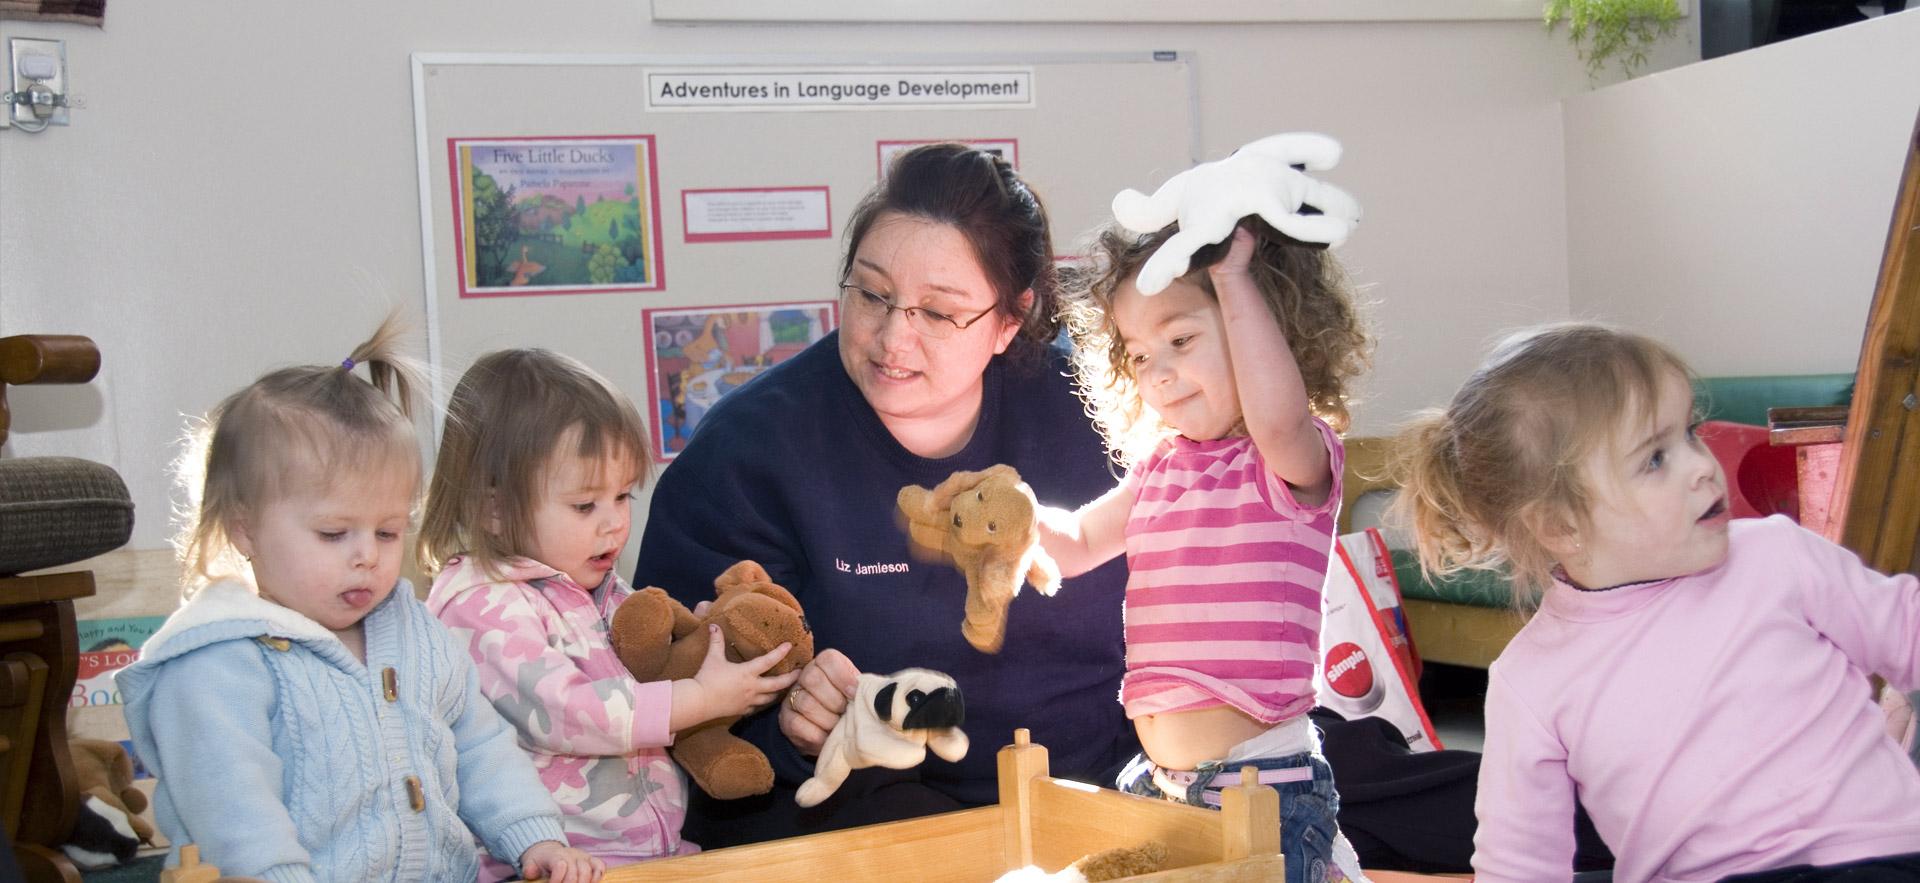 One female Early Childhood Education student plays with young children.